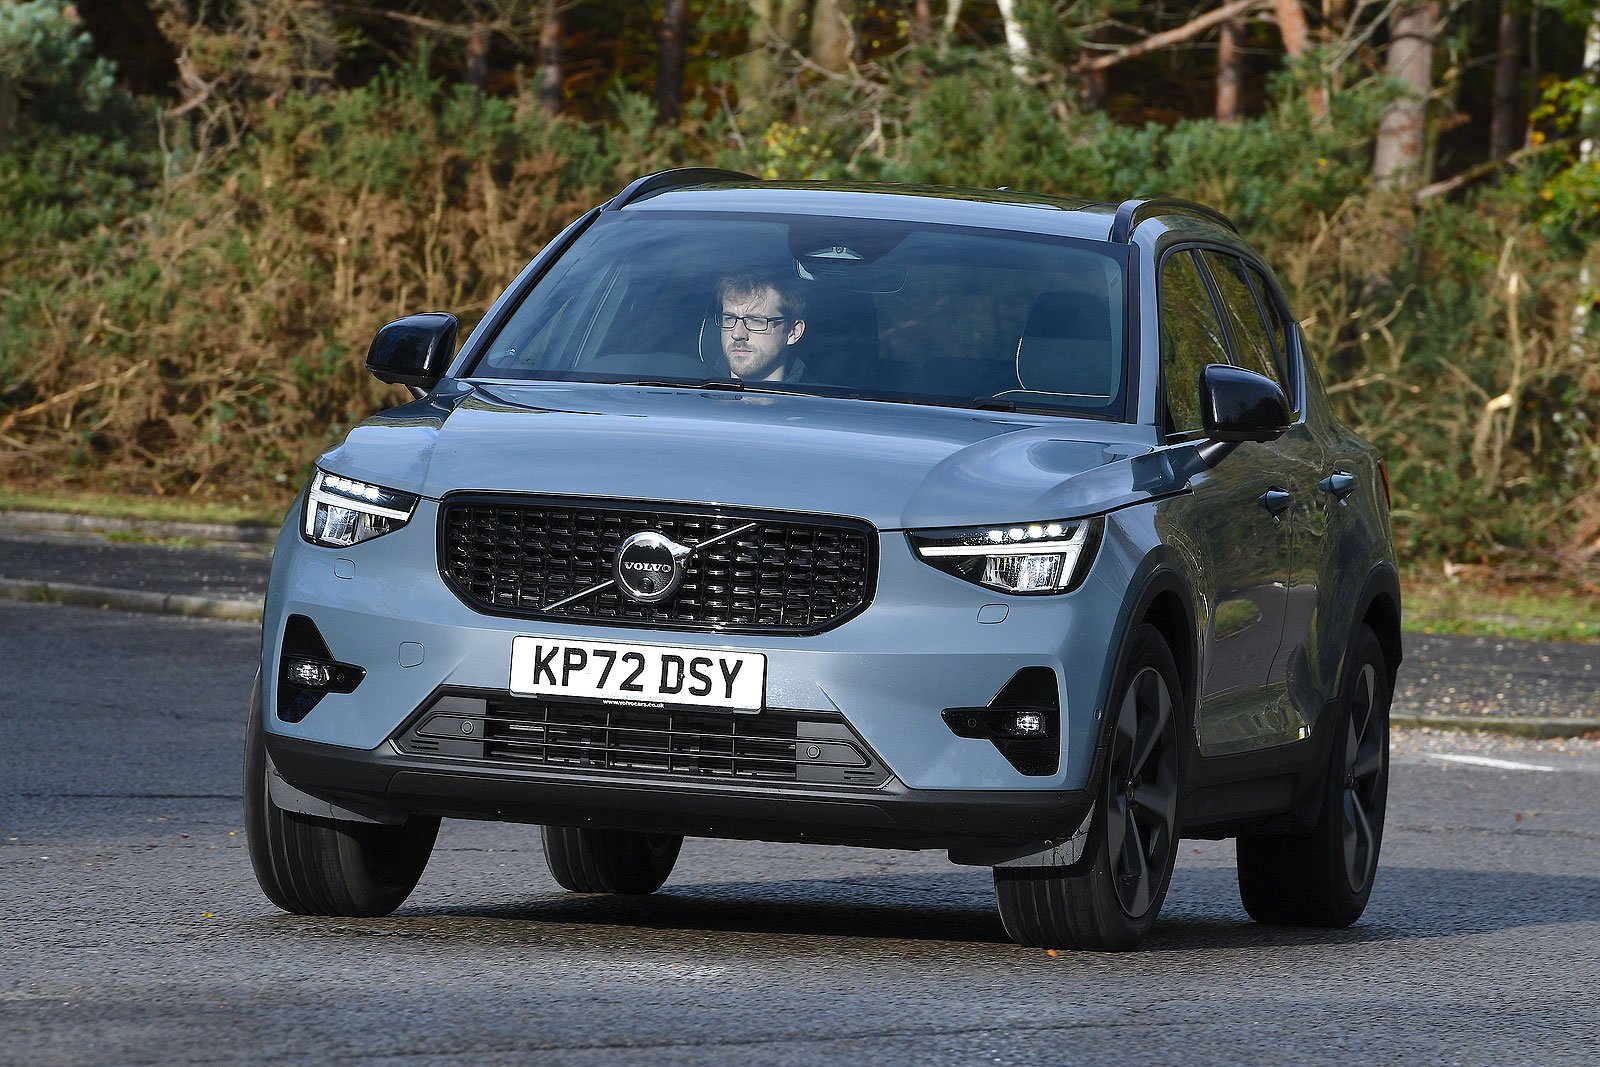 <p><strong>Model</strong> XC40 | <strong>Version</strong> 2.0 B3P Core | <strong>List price</strong> £35,835 | <strong>Target Price</strong> £33,685 | <strong>Target PCP</strong> £409 | <strong>Star Rating</strong> 5</p>  <p>The cheapest Volvo model is also one of its best, and the XC40 is currently our favourite family SUV. It's comfortable, spacious enough for your family, has a high-quality interior and comes loaded with safety kit. This version has only 127bhp, but we think it should have enough pep for most situations.</p>  <p><strong>Read our full Volvo XC40 review or see new Volvo XC40 deals >></strong></p>     <h2><strong>Next: Buy your next car with What Car? >></strong></h2>